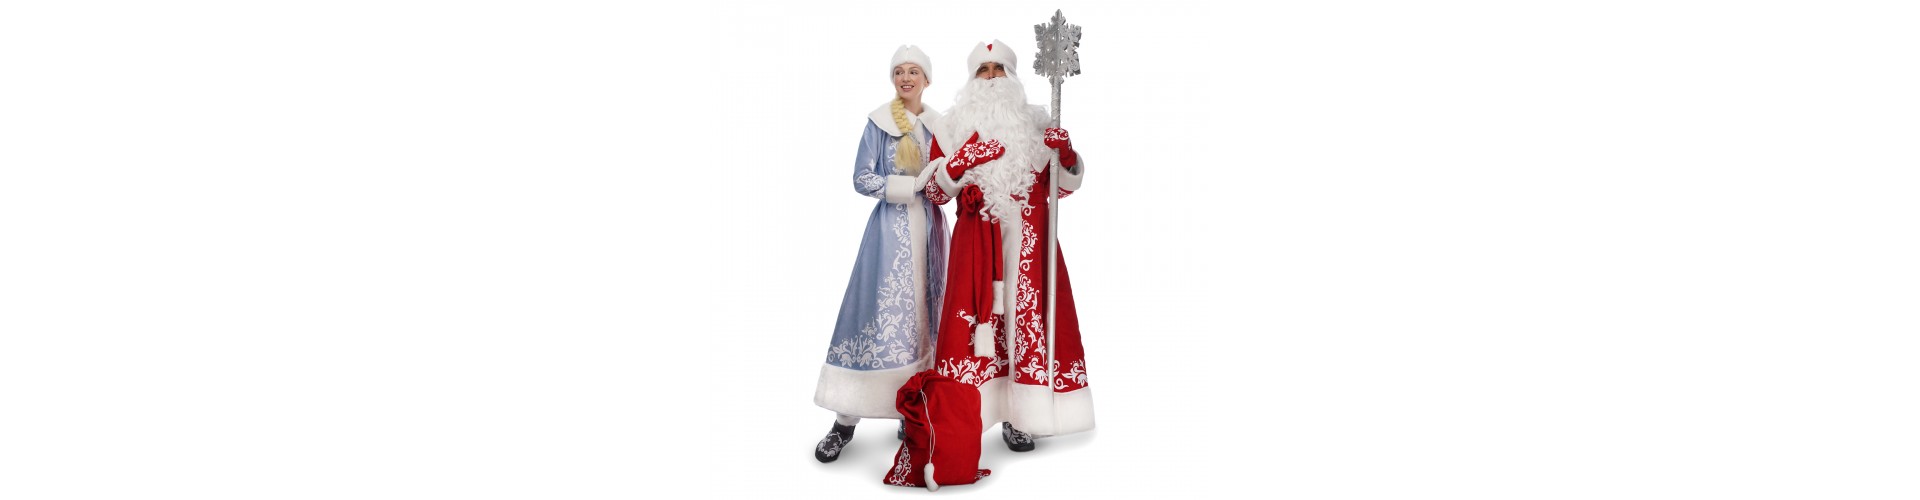 We buy New Year's costumes in Chernivtsi quickly and profitably